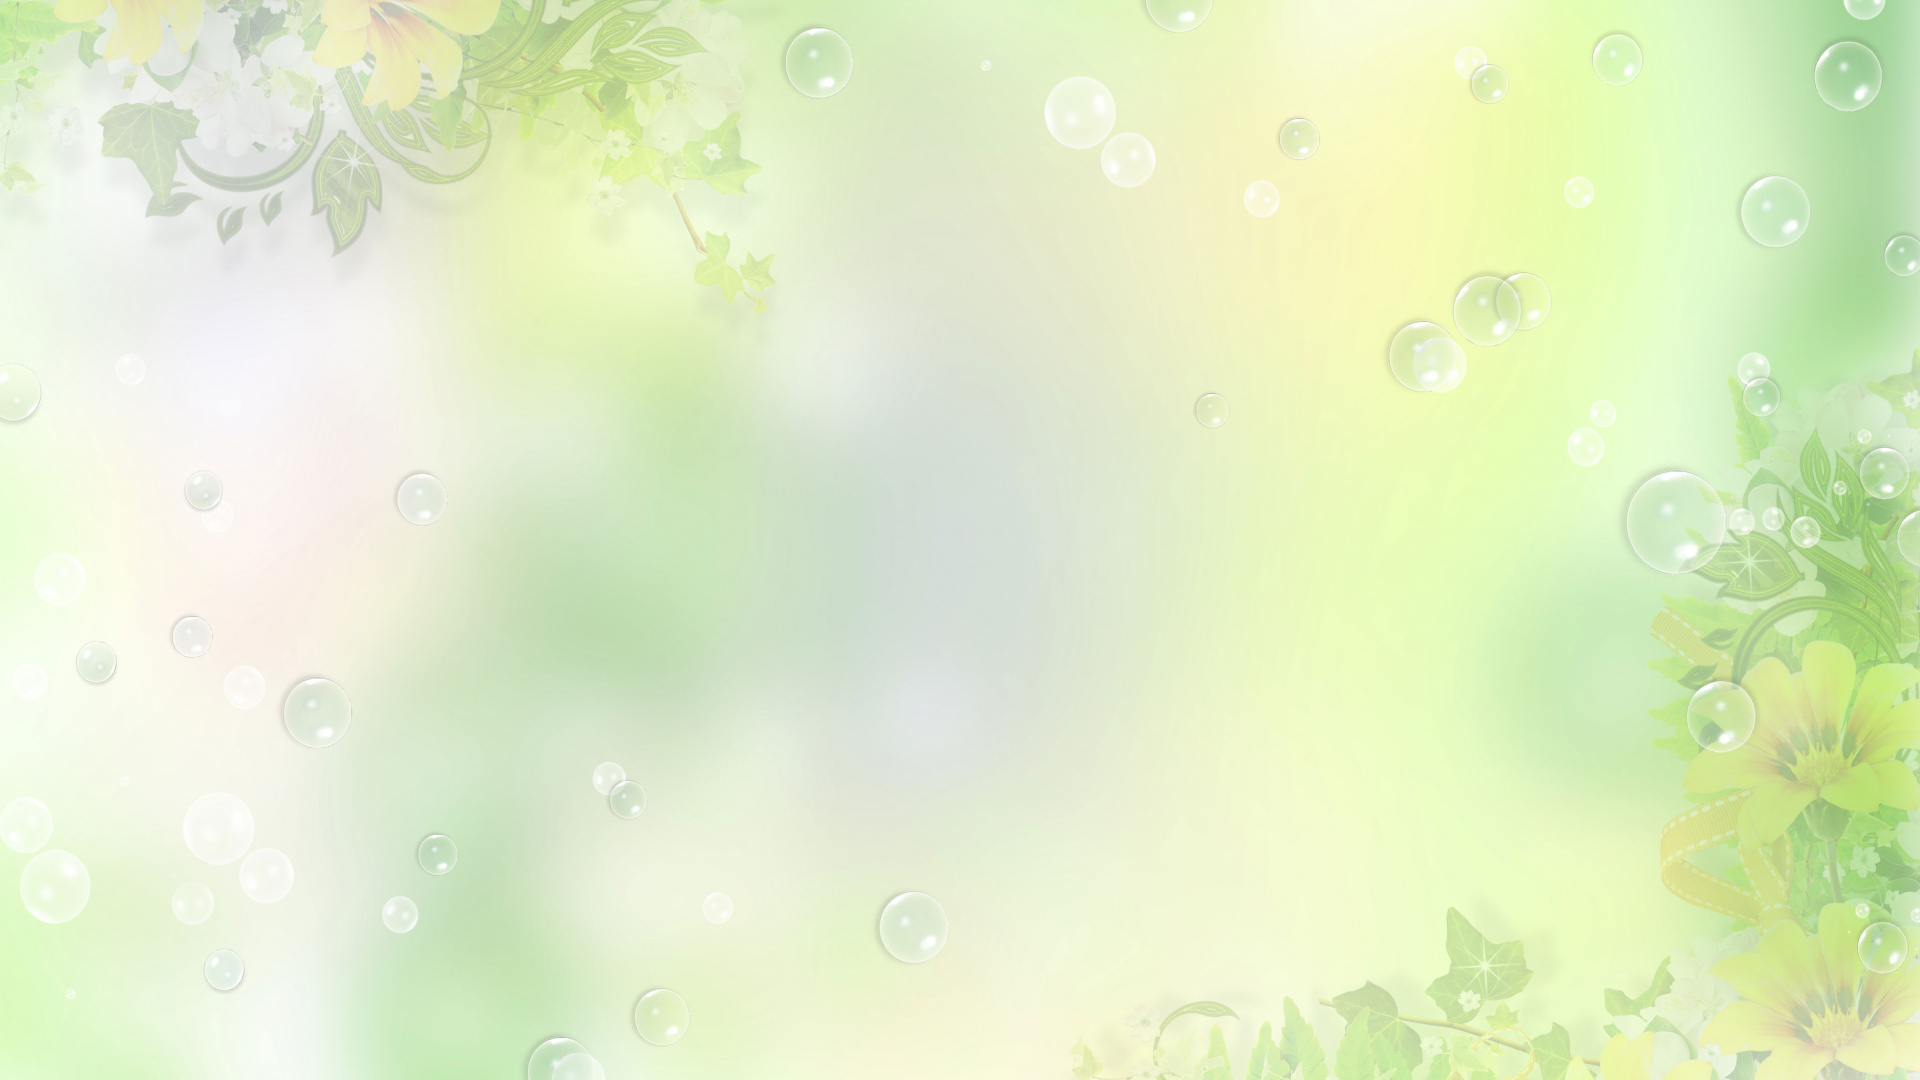 Water Droplets on Green Leaves. Wallpaper in 1920x1080 Resolution